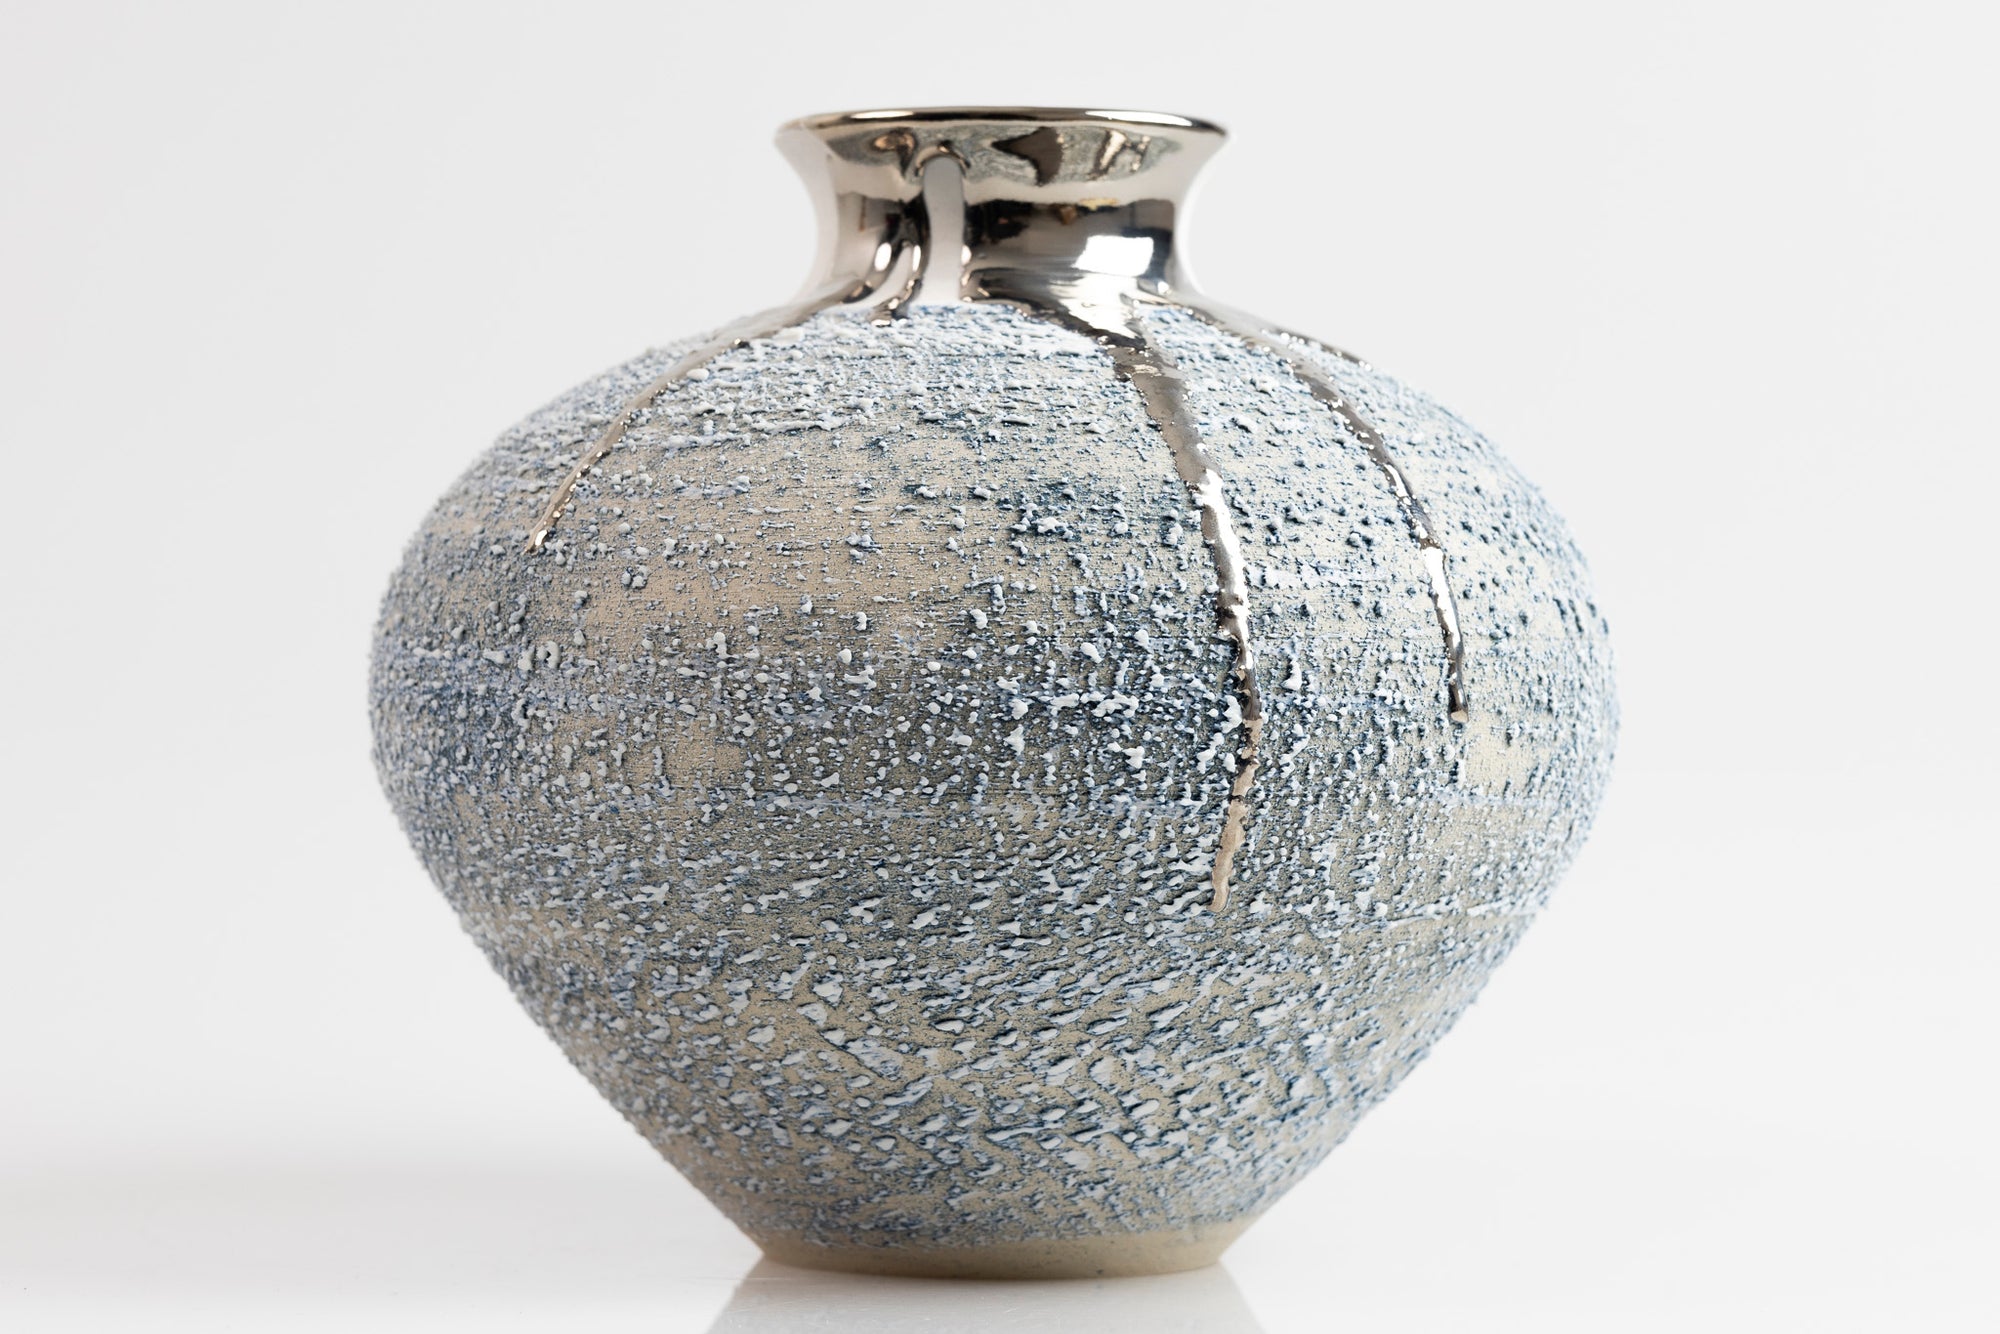 Textured vase with platinum lustre, by Alex McCarthy, available from Padstow Gallery, Cornwal